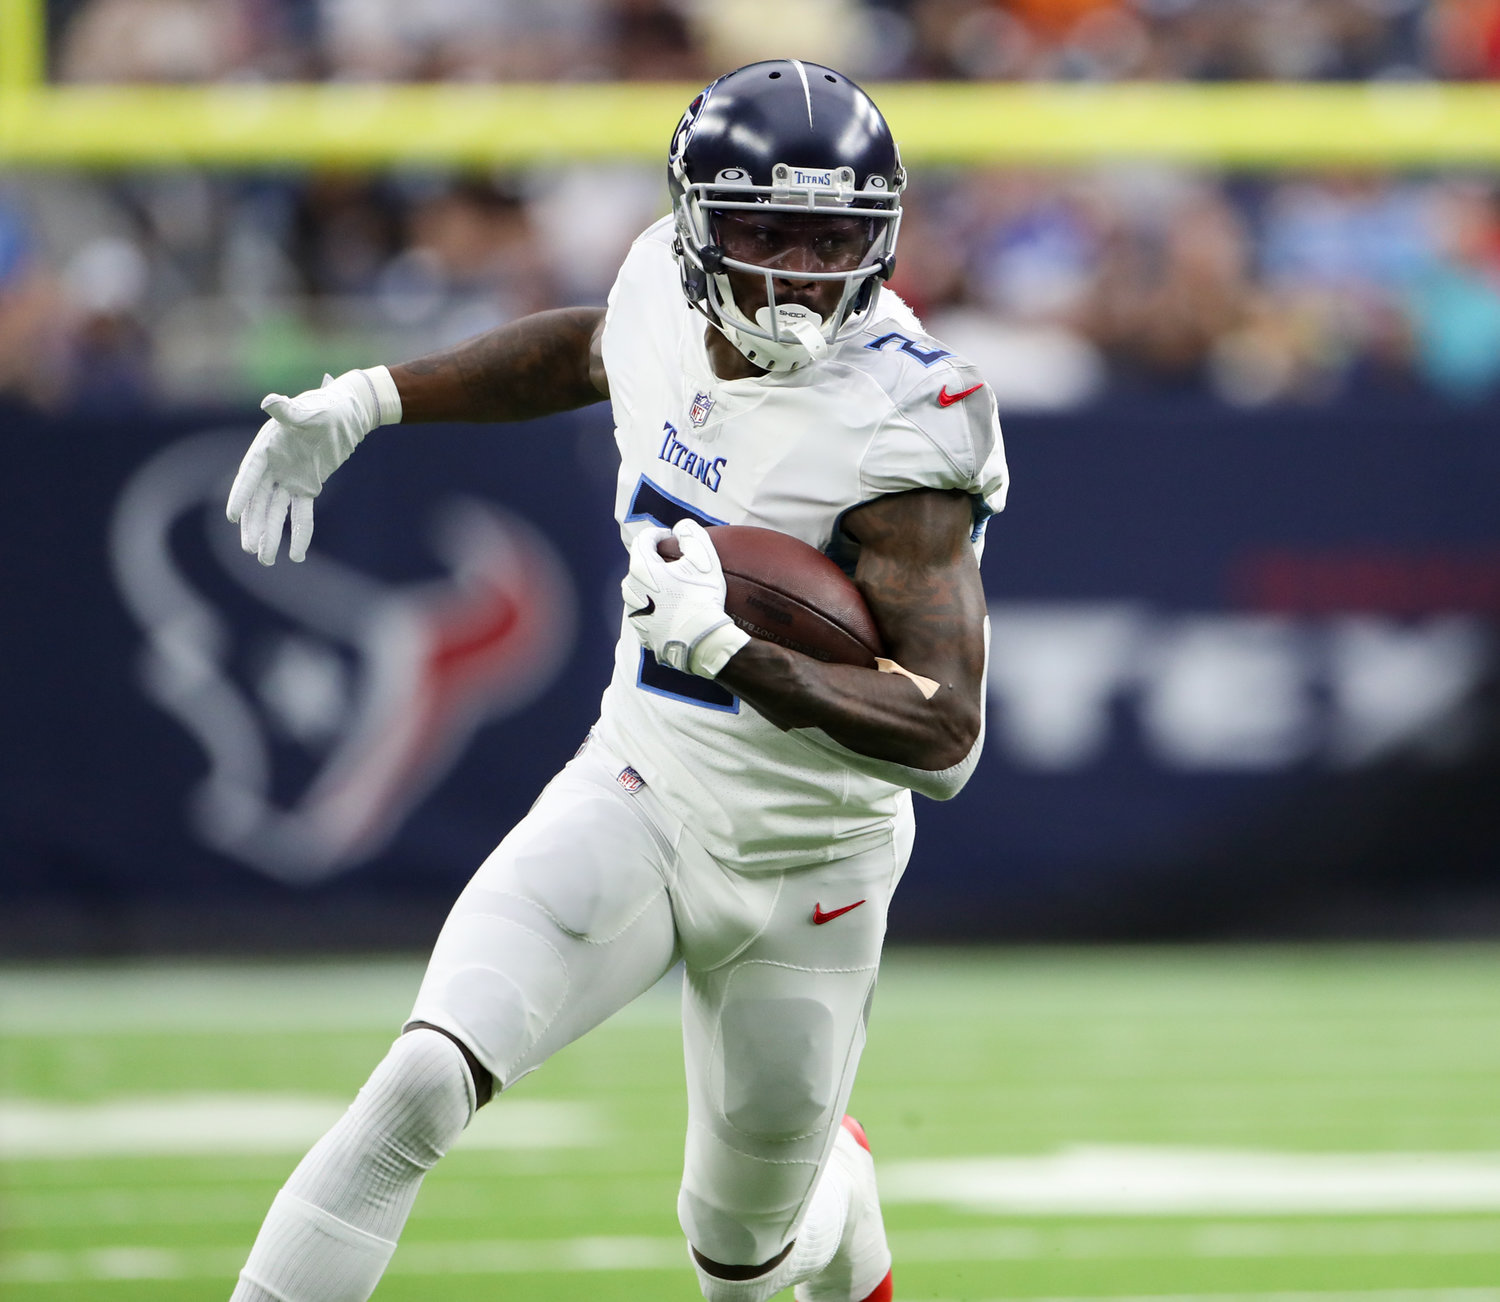 Tennessee Titans wide receiver Julio Jones (2) carries the ball during an NFL game between the Texans and the Titans on Jan. 9, 2022 in Houston, Texas.